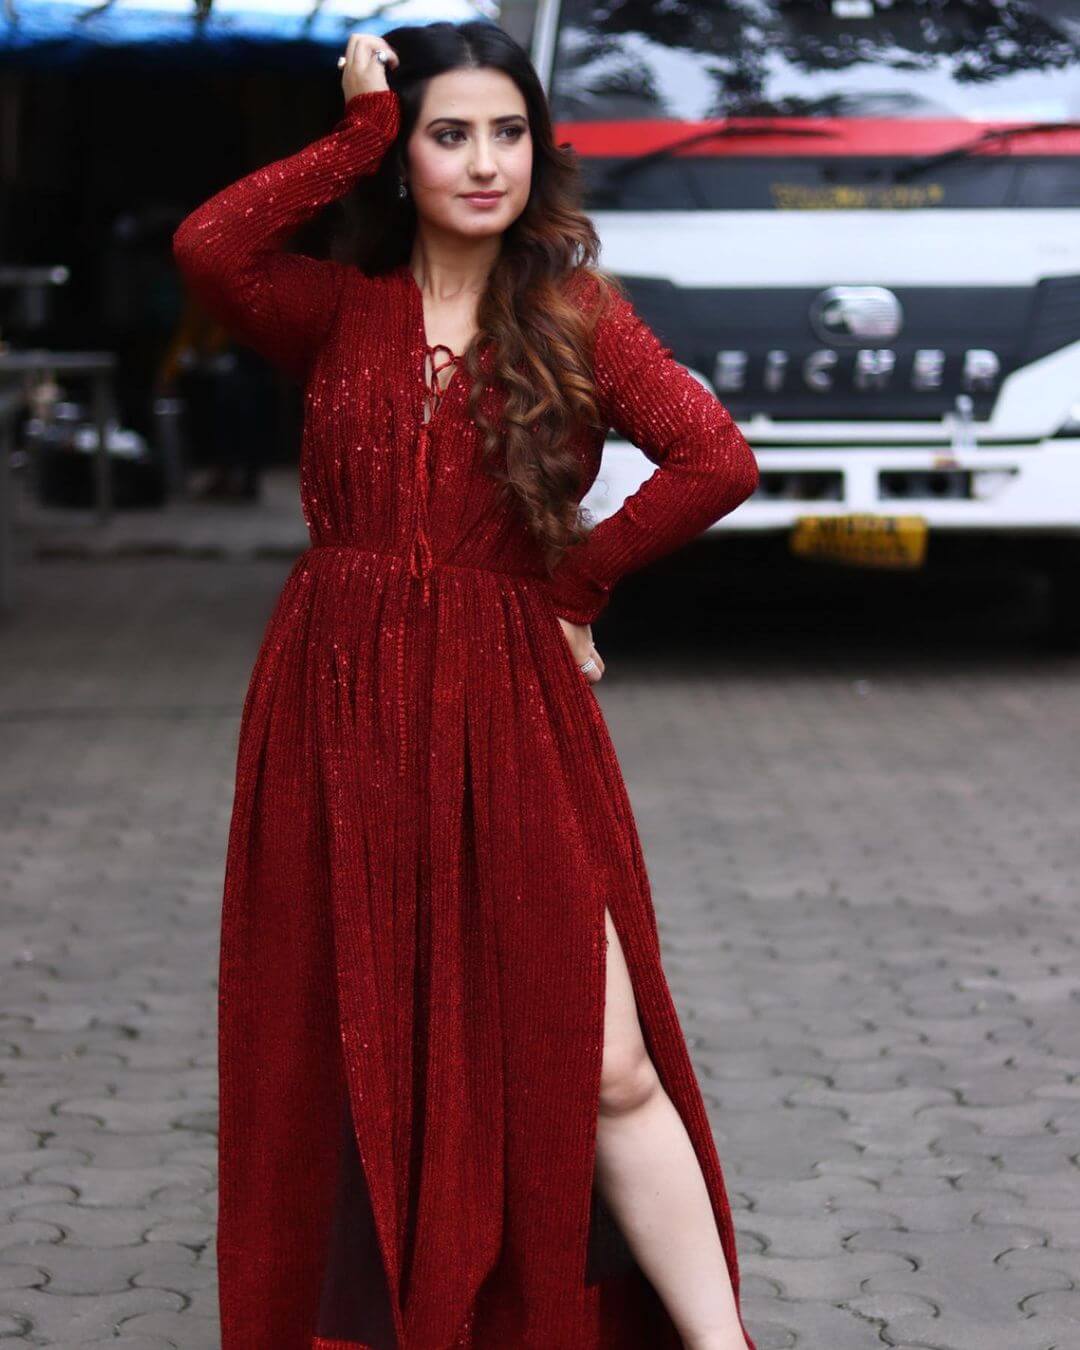 Aalisha In Red Slit Cut Glittery Gown Outfit Aalisha Panwar Fashionable Outfit Inspo